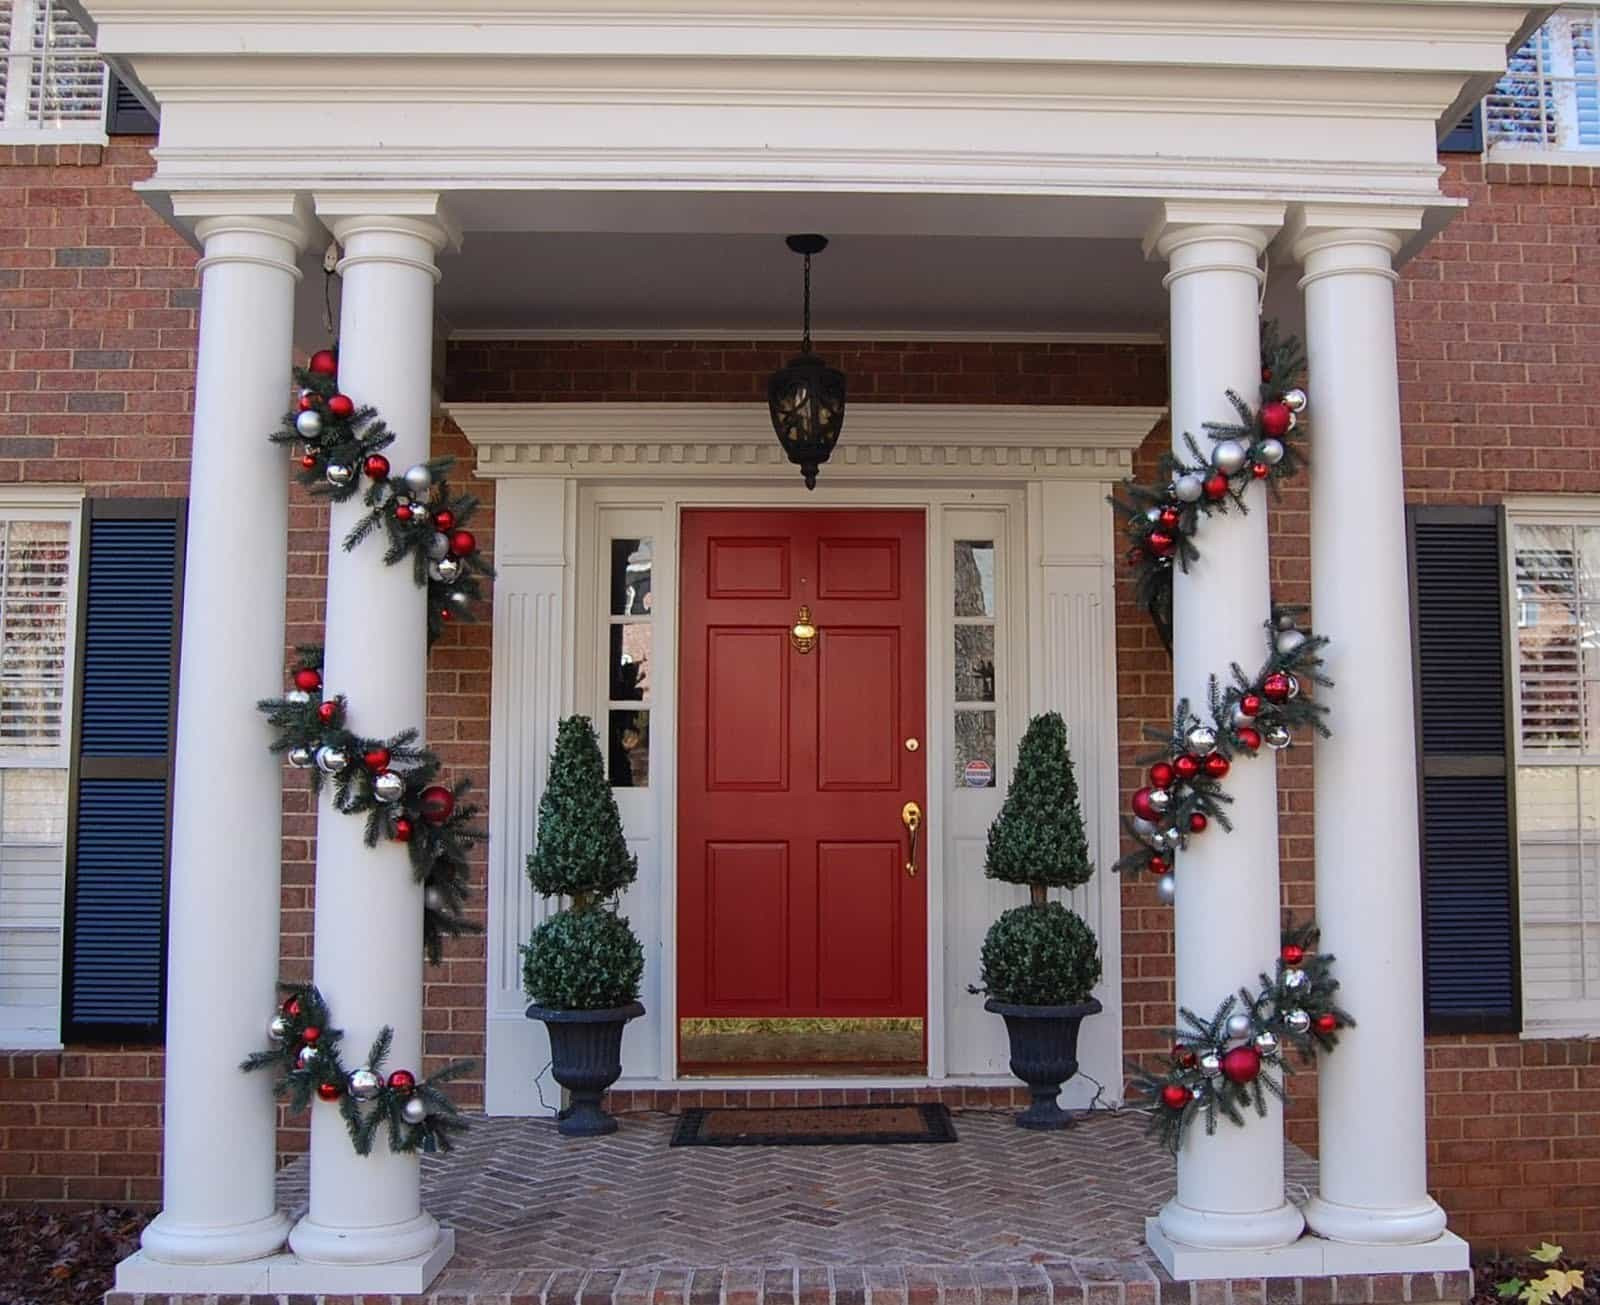 Christmas Decorated Porch
 Christmas Decorating Ideas for Your Porch